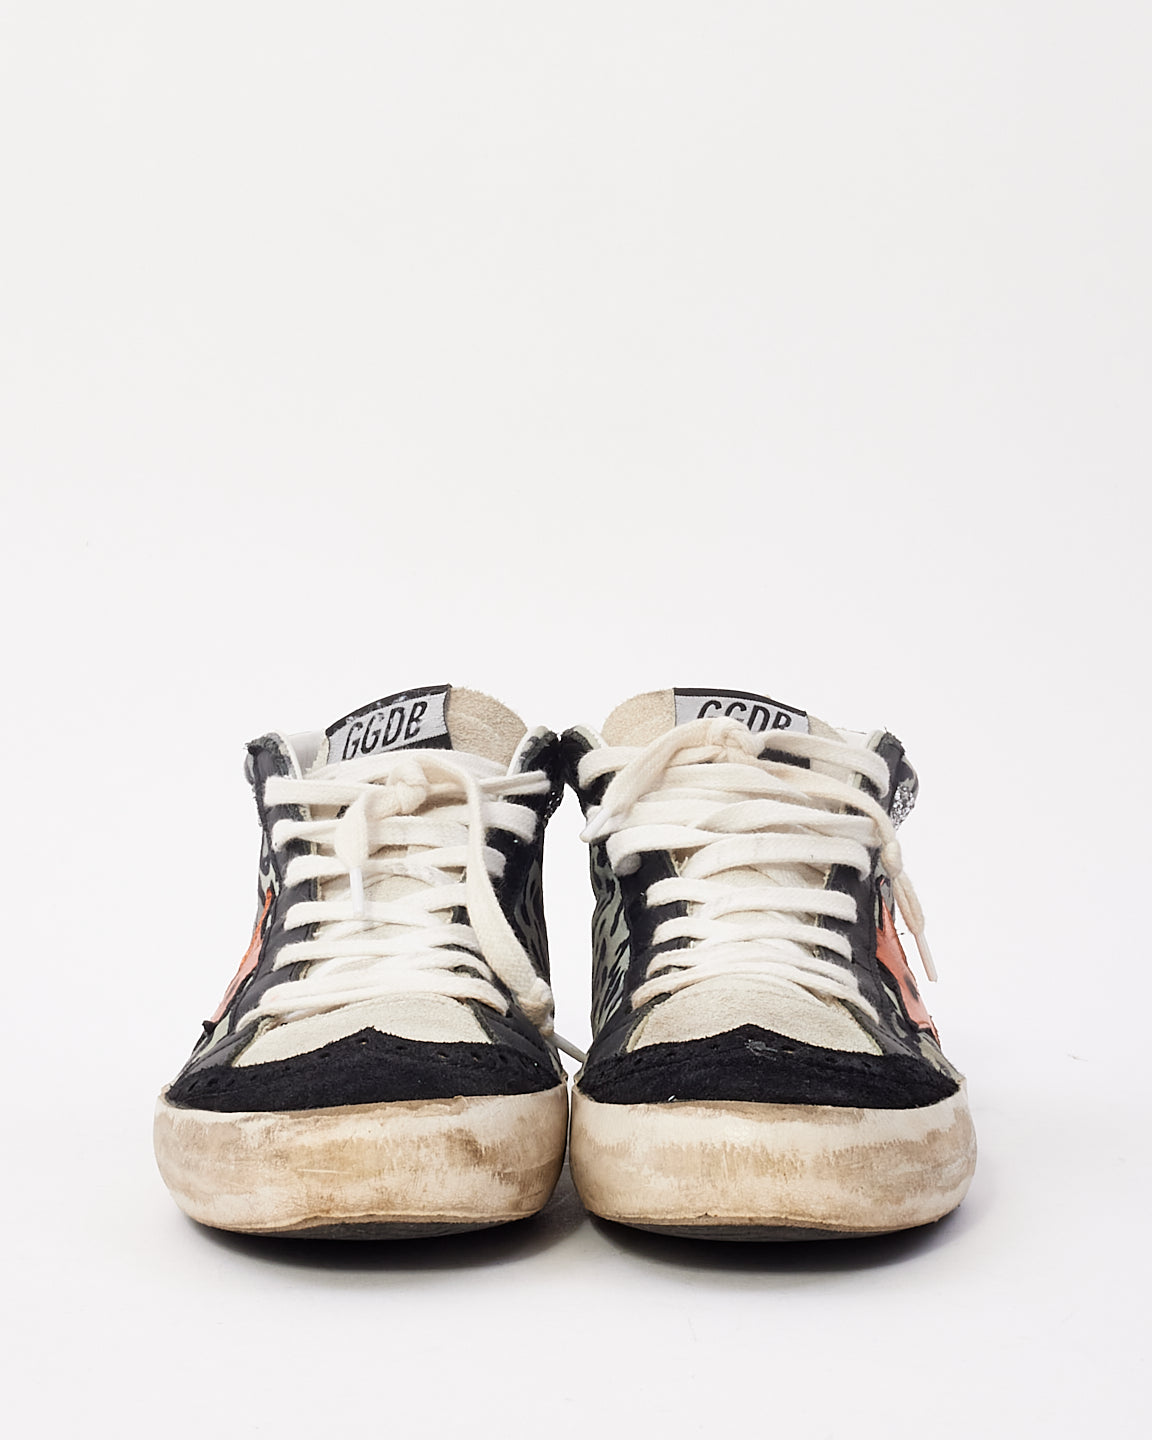 Golden Goose Black & Grey Leopard Suede Mid Star High Rise Sneakers - 38